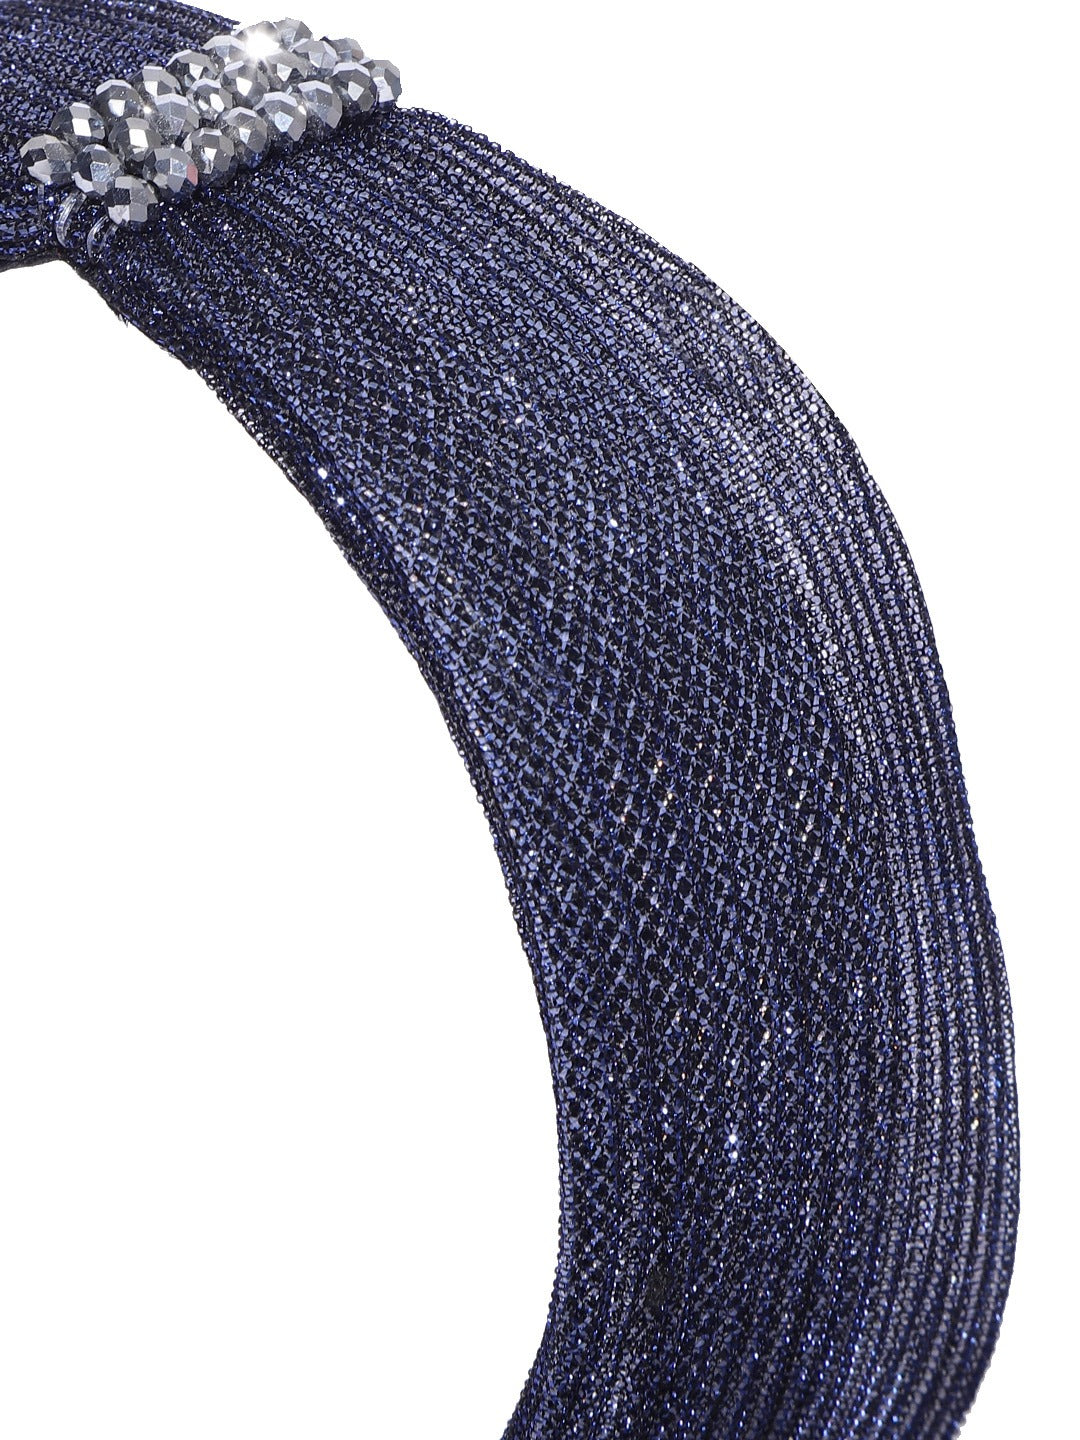 Blueberry navy blue simar fabric hair band